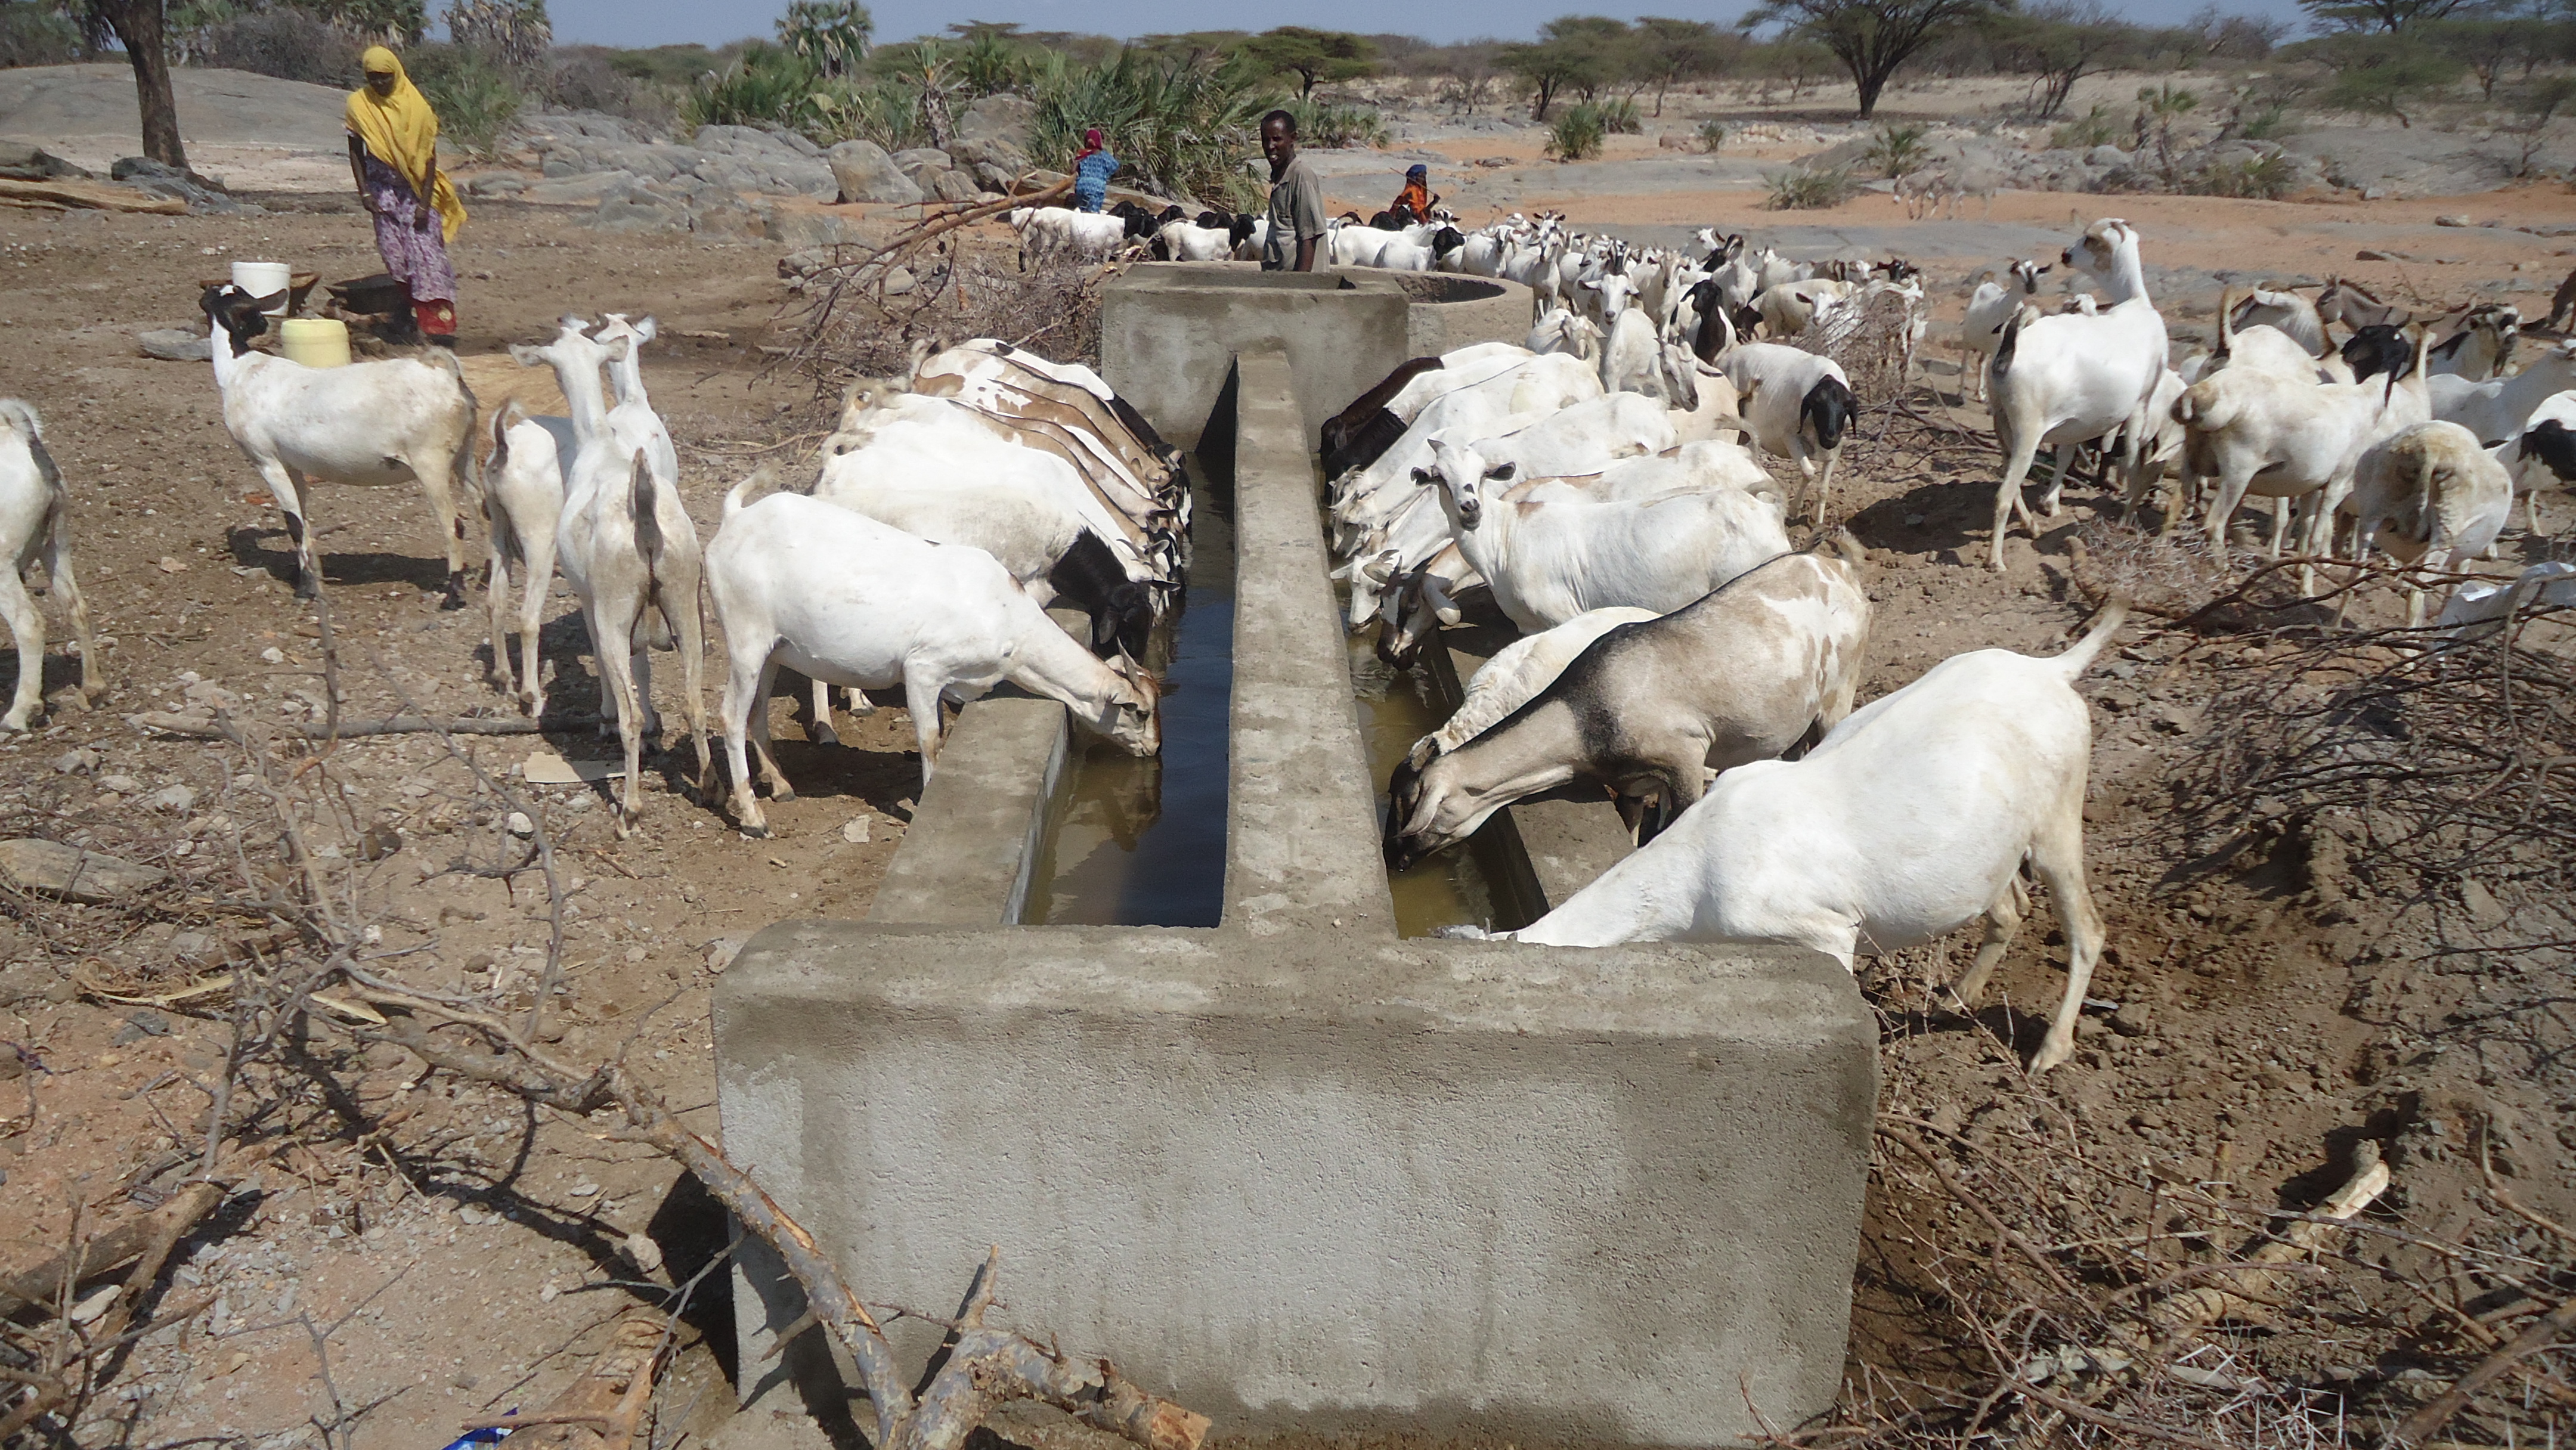 Shoats accessing water from the newly constructed trough in Tana location, Isiolo County